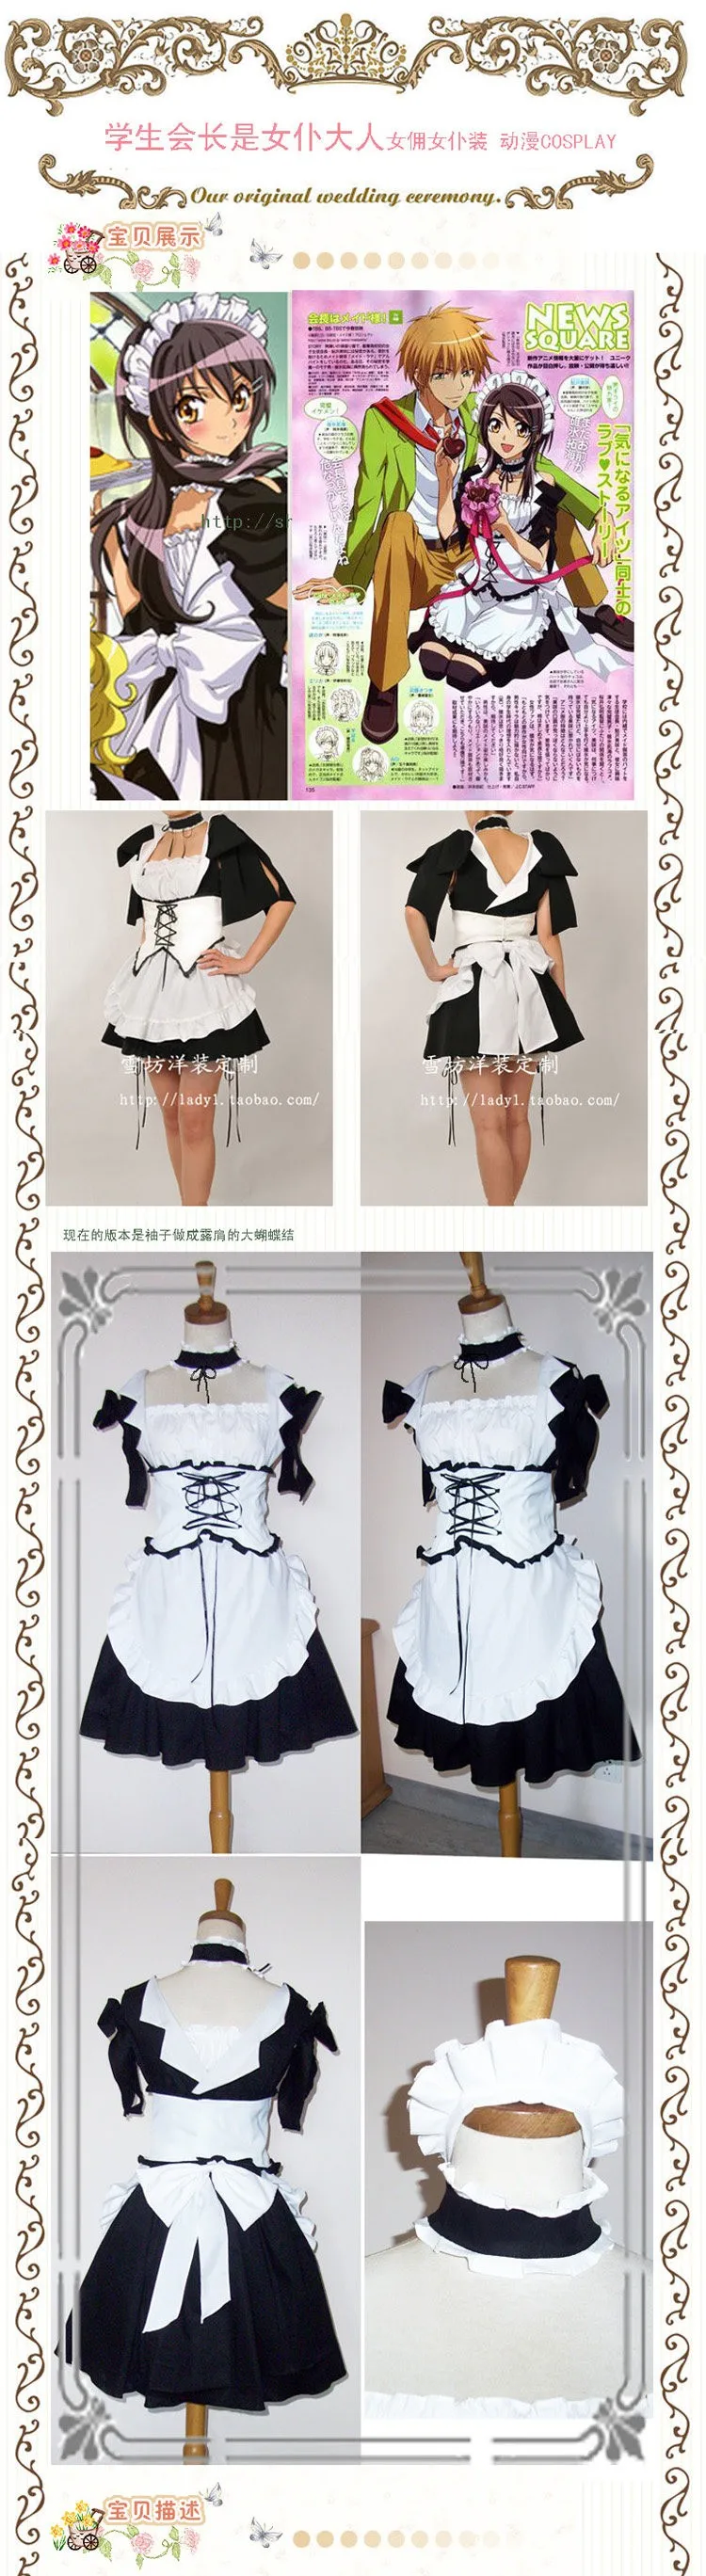 NoEnName_Null Anime Kaichou Wa Maid-sama Cosplay Ayuzawa Misaki Halloween Maid Service Full Set 4in1dressesbow-knotapronbelt -Outlet Maid Outfit Store